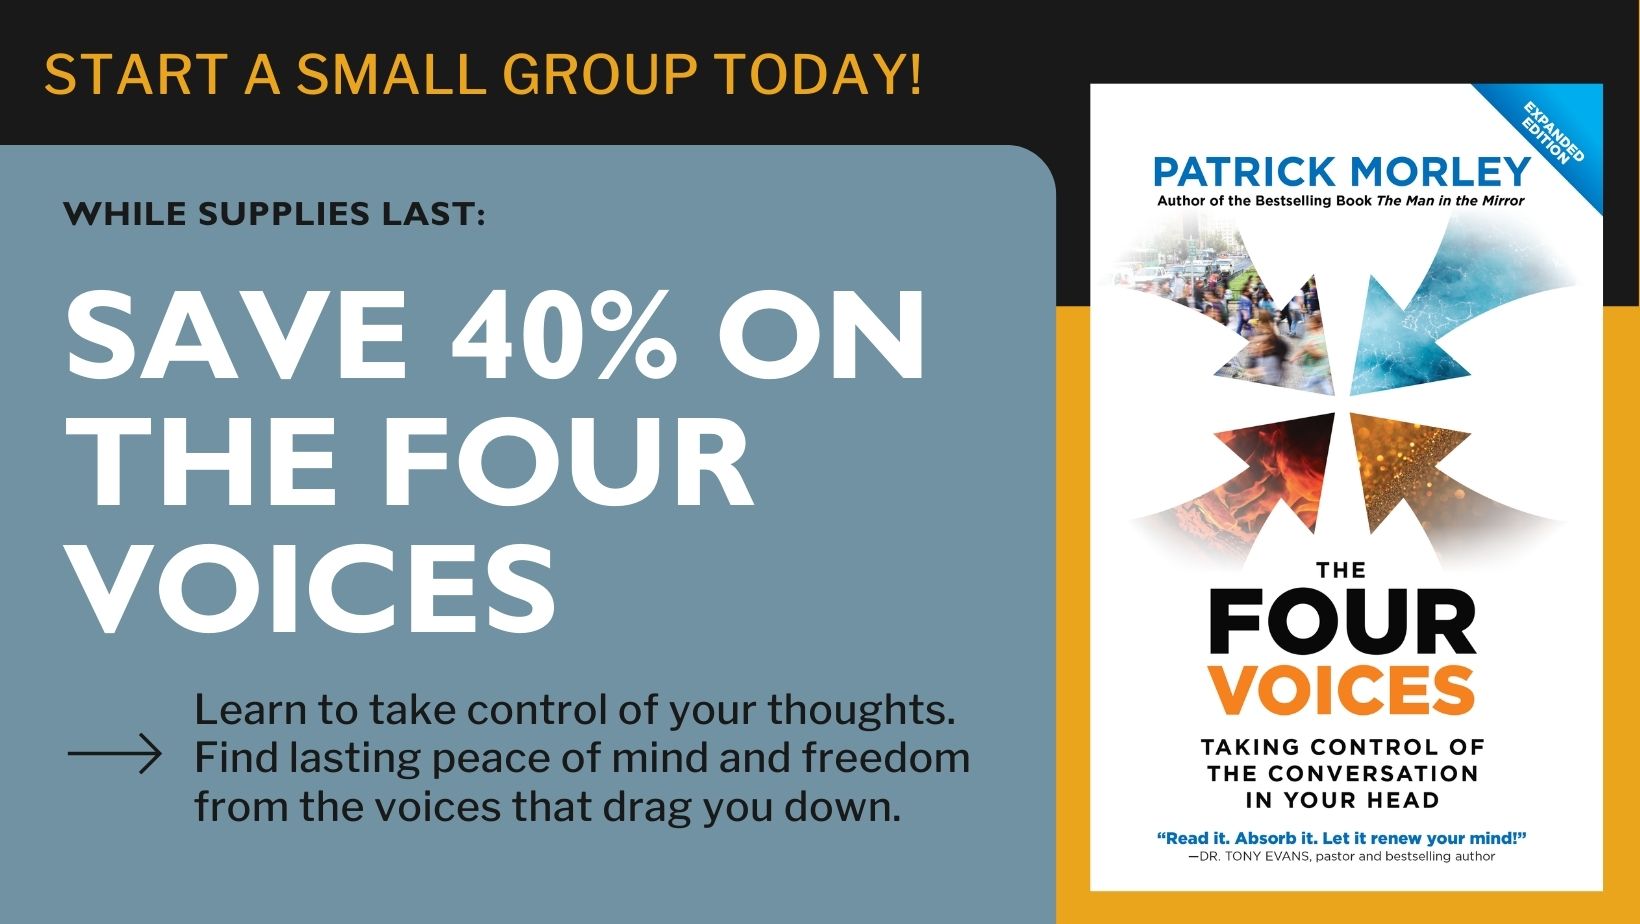 The Four Voices is 40% off